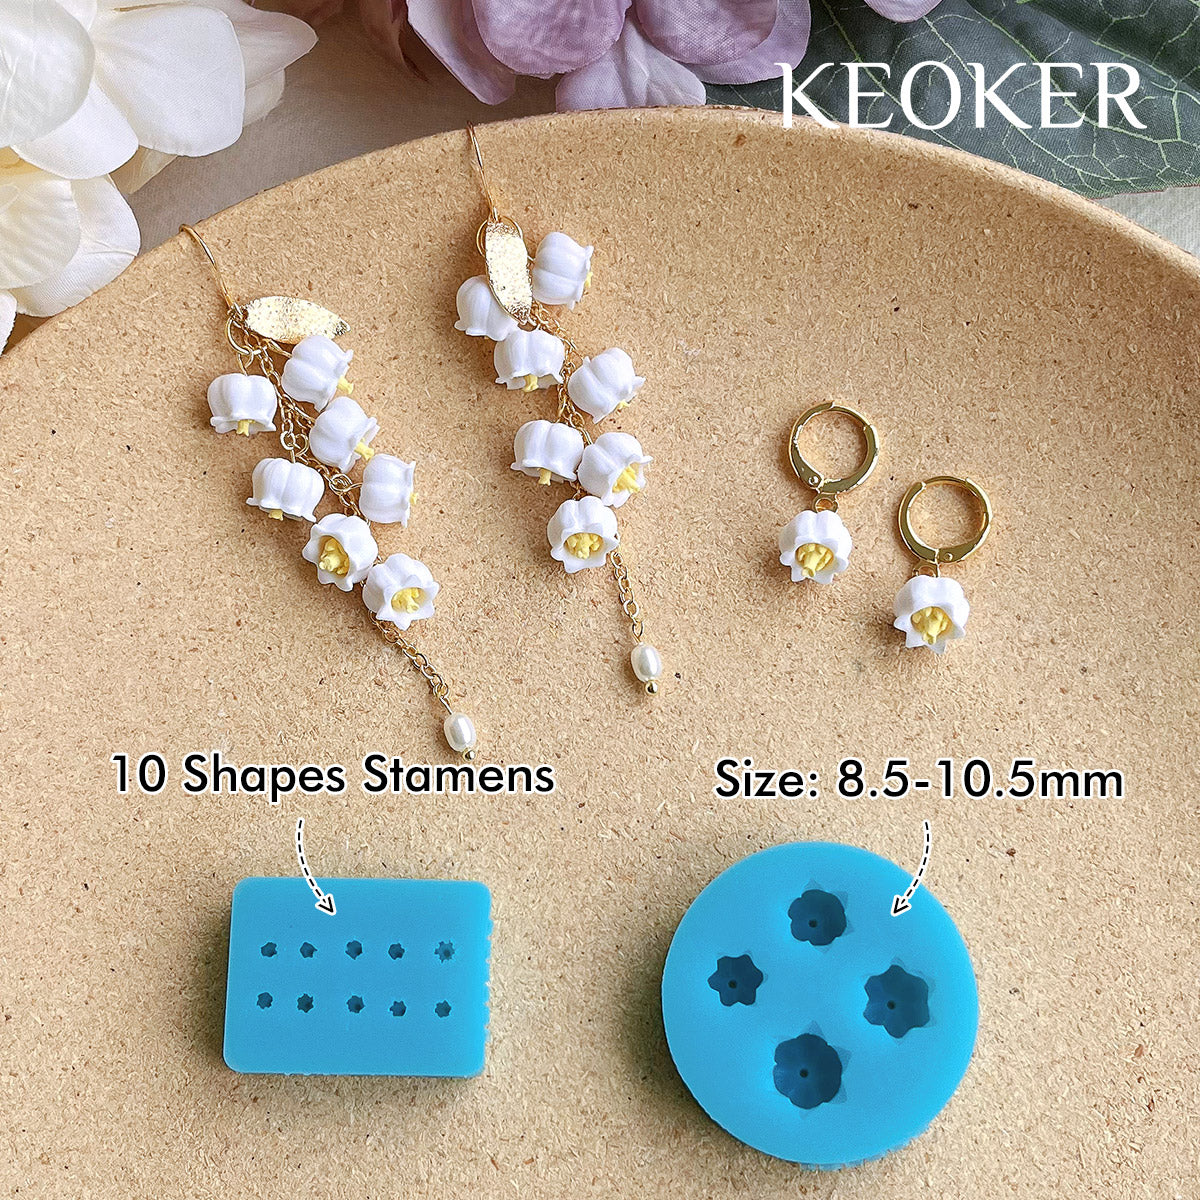 Keoker Mini Lavender Polymer Clay Earrings Molds mini Polymer Clay Cutters  and Molds, Perfect for Jewelry Making and Earring Lovers 